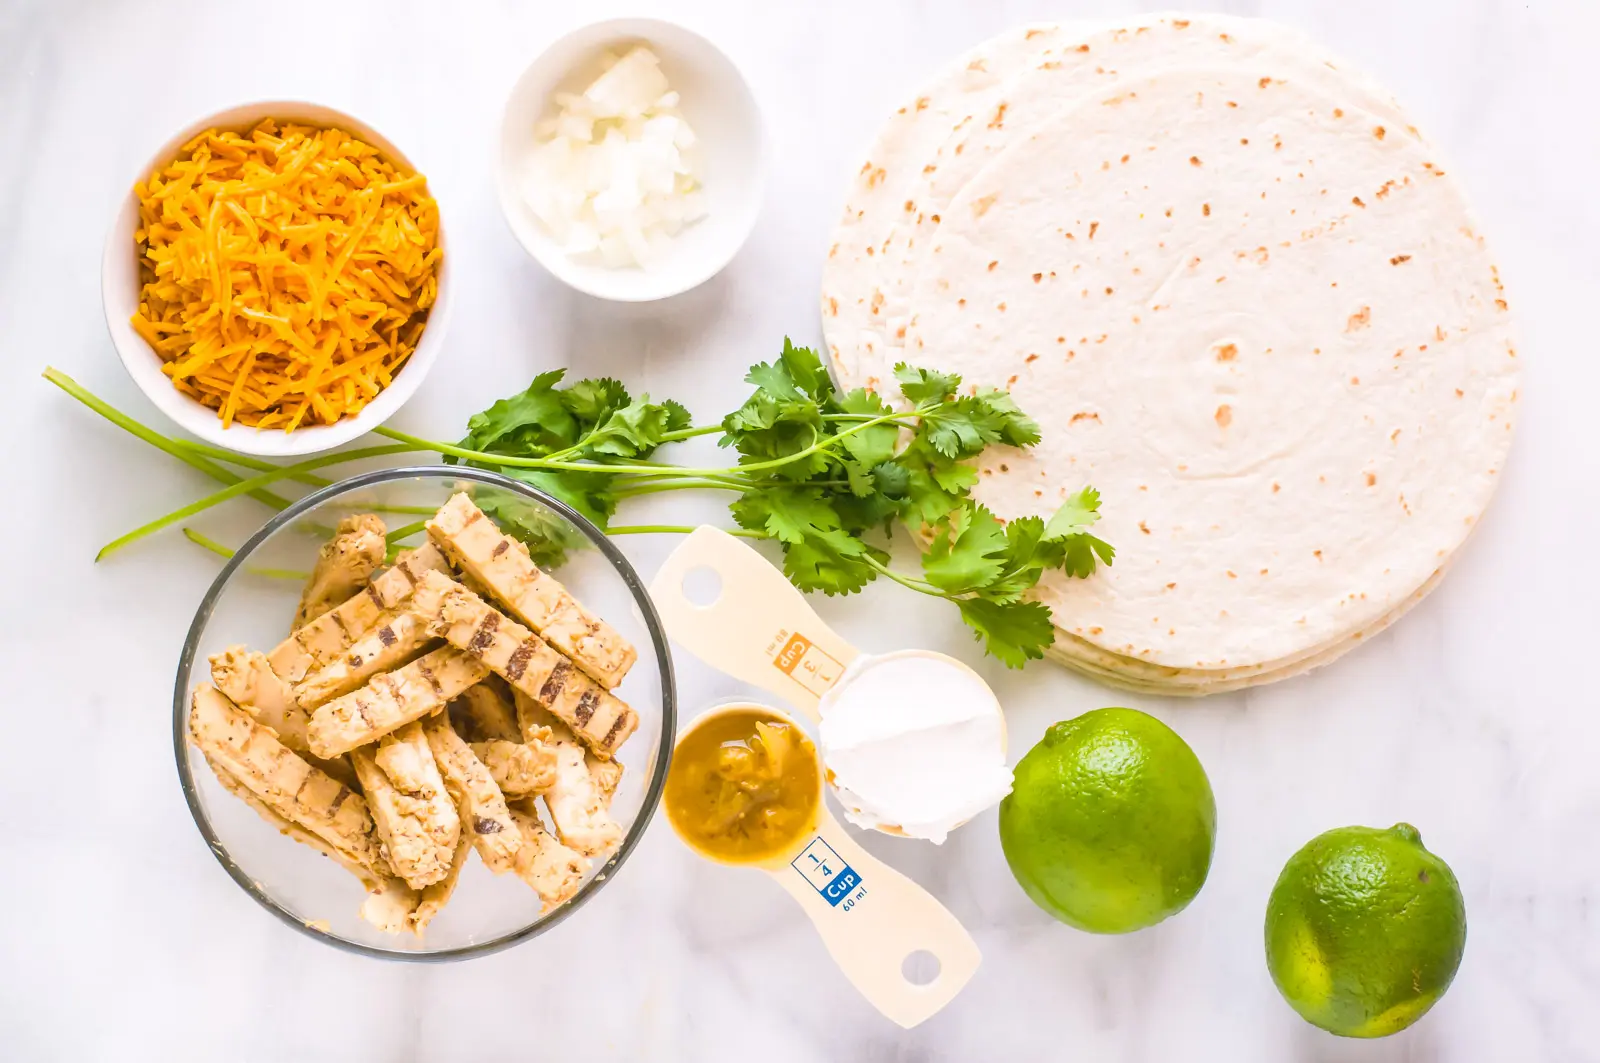 Looking down on ingredients such as flour tortillas, limes, fresh cilantro, chopped onion, and more.